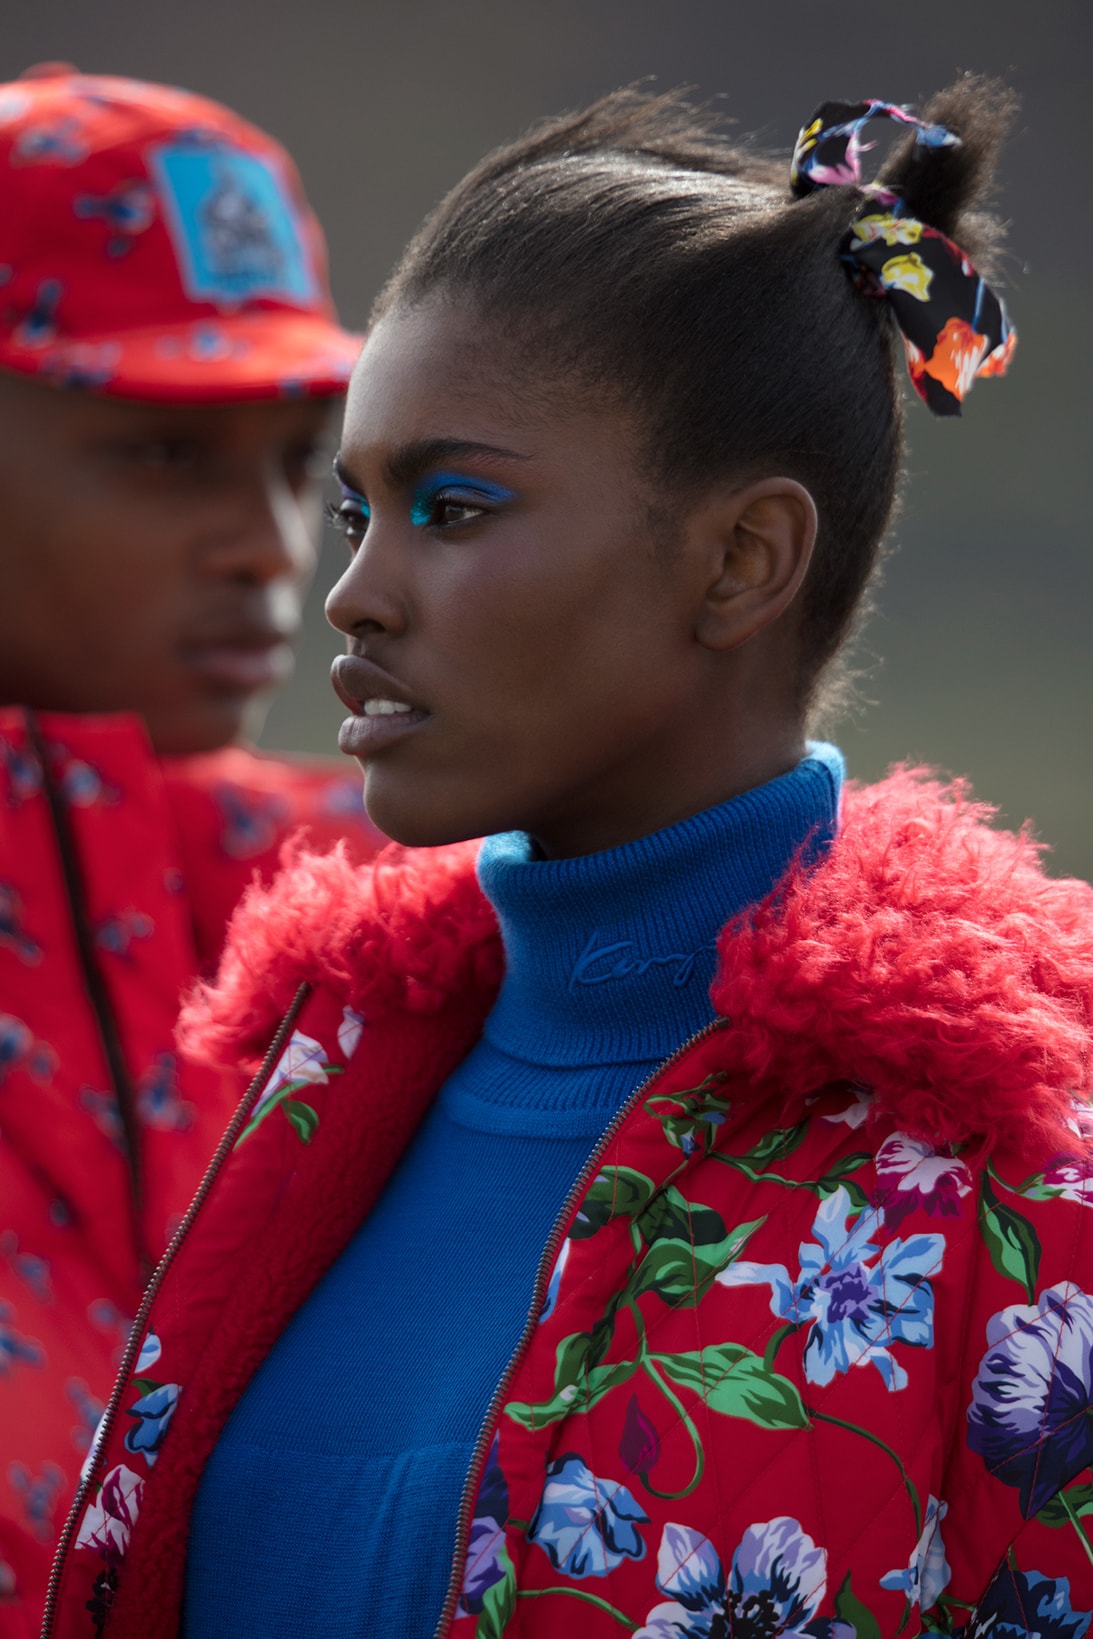 KENZO La Collection Memento No 1 Pop Up Shop Opening Ceremony 2017 October Release Date Info collection fashion style Hans Feurer photography